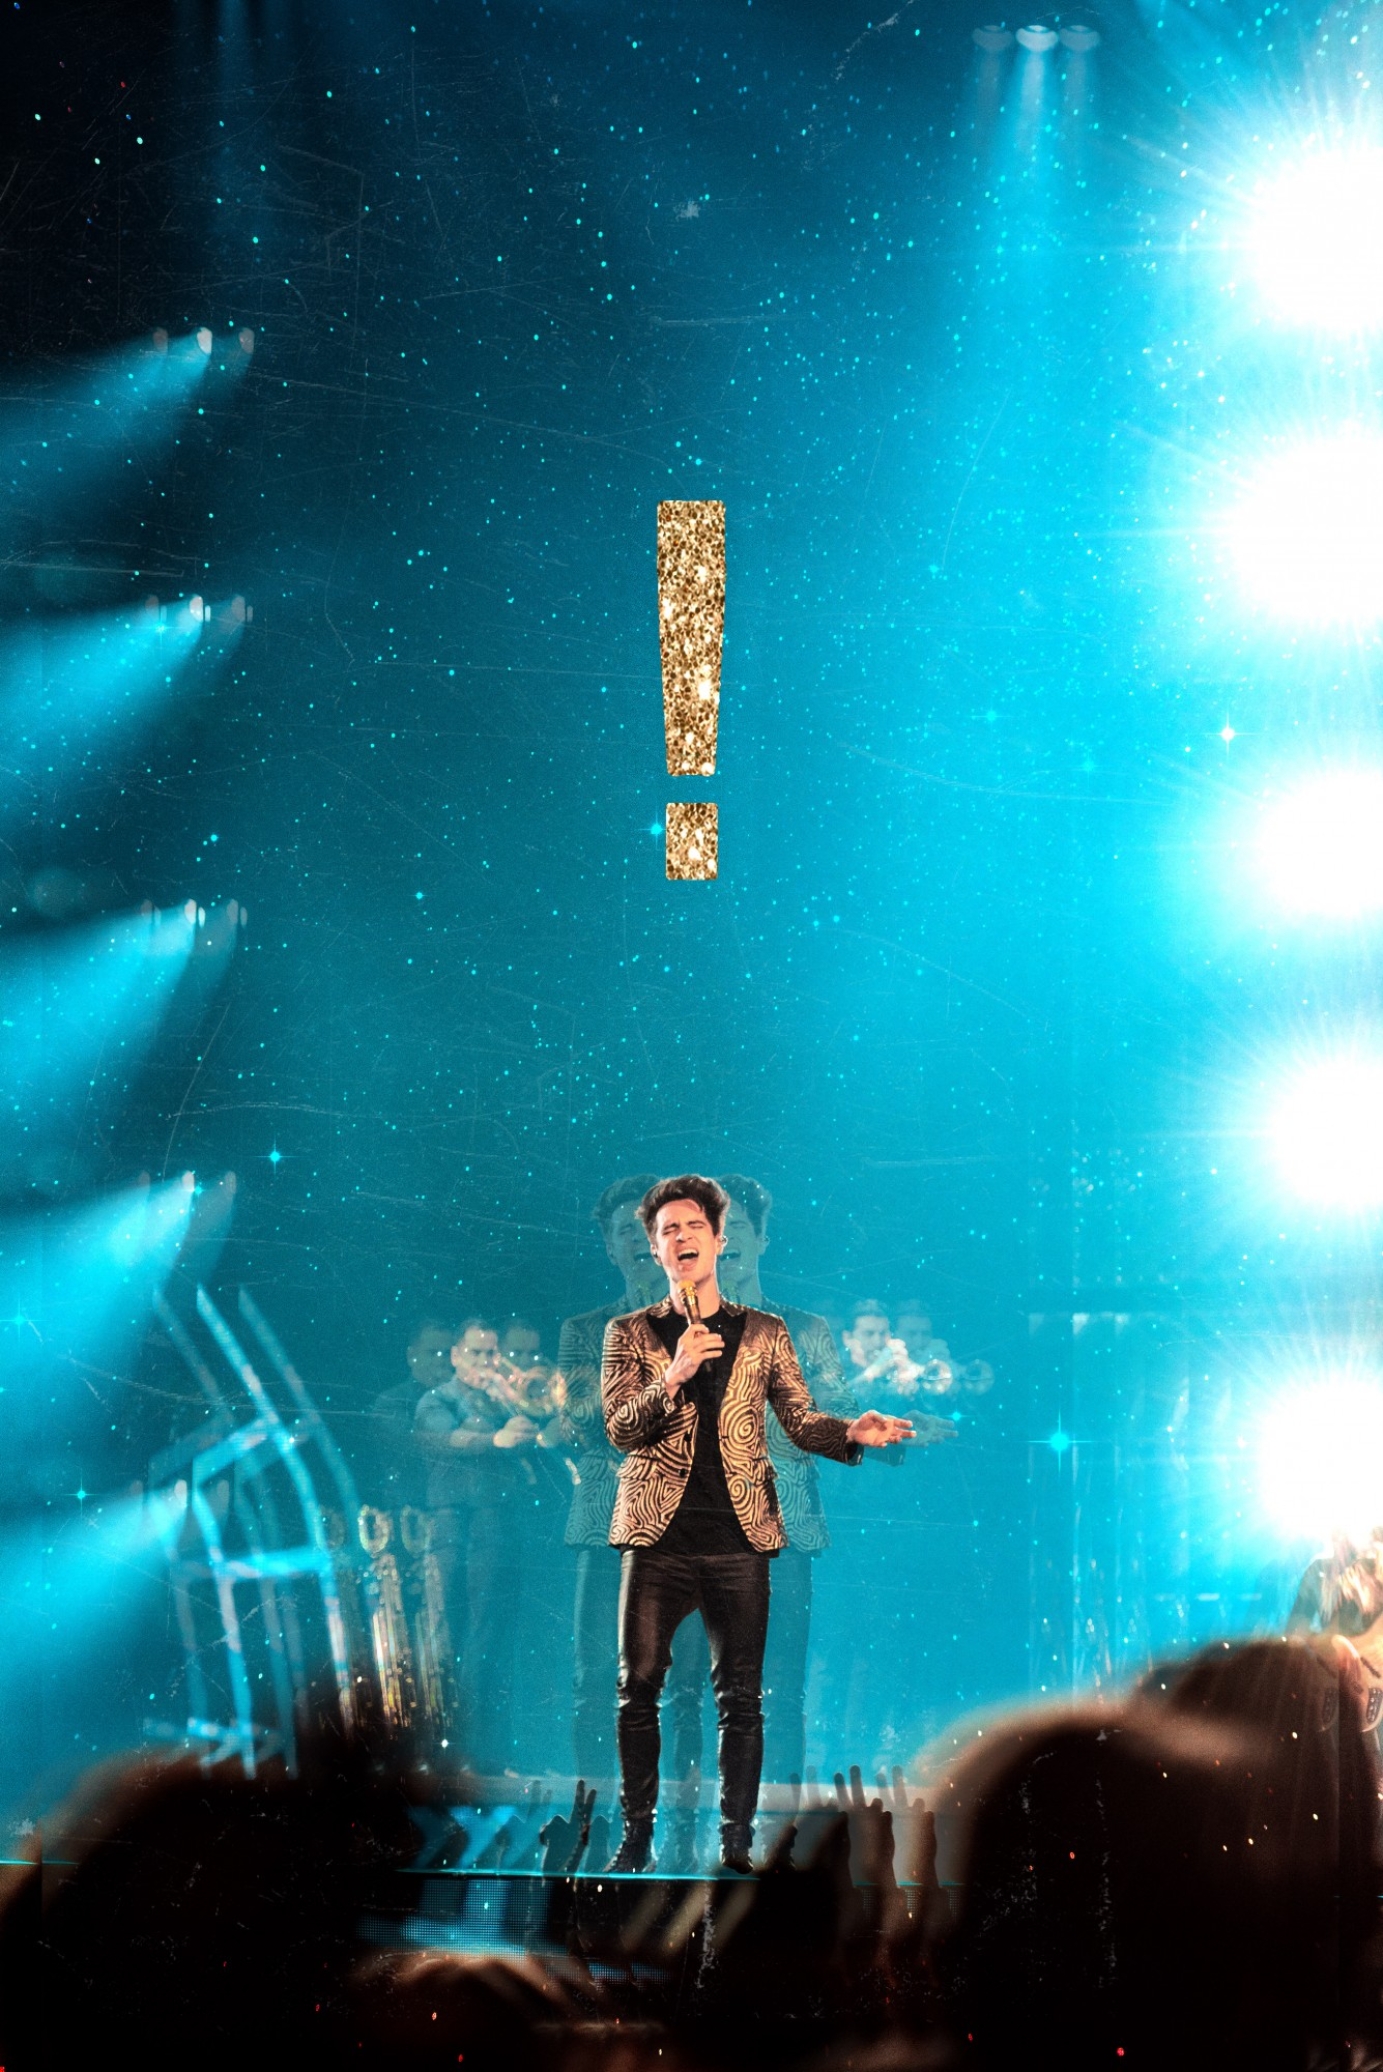 Live photography for Brendon Urie, Panic! at the Disco by Briar Burns